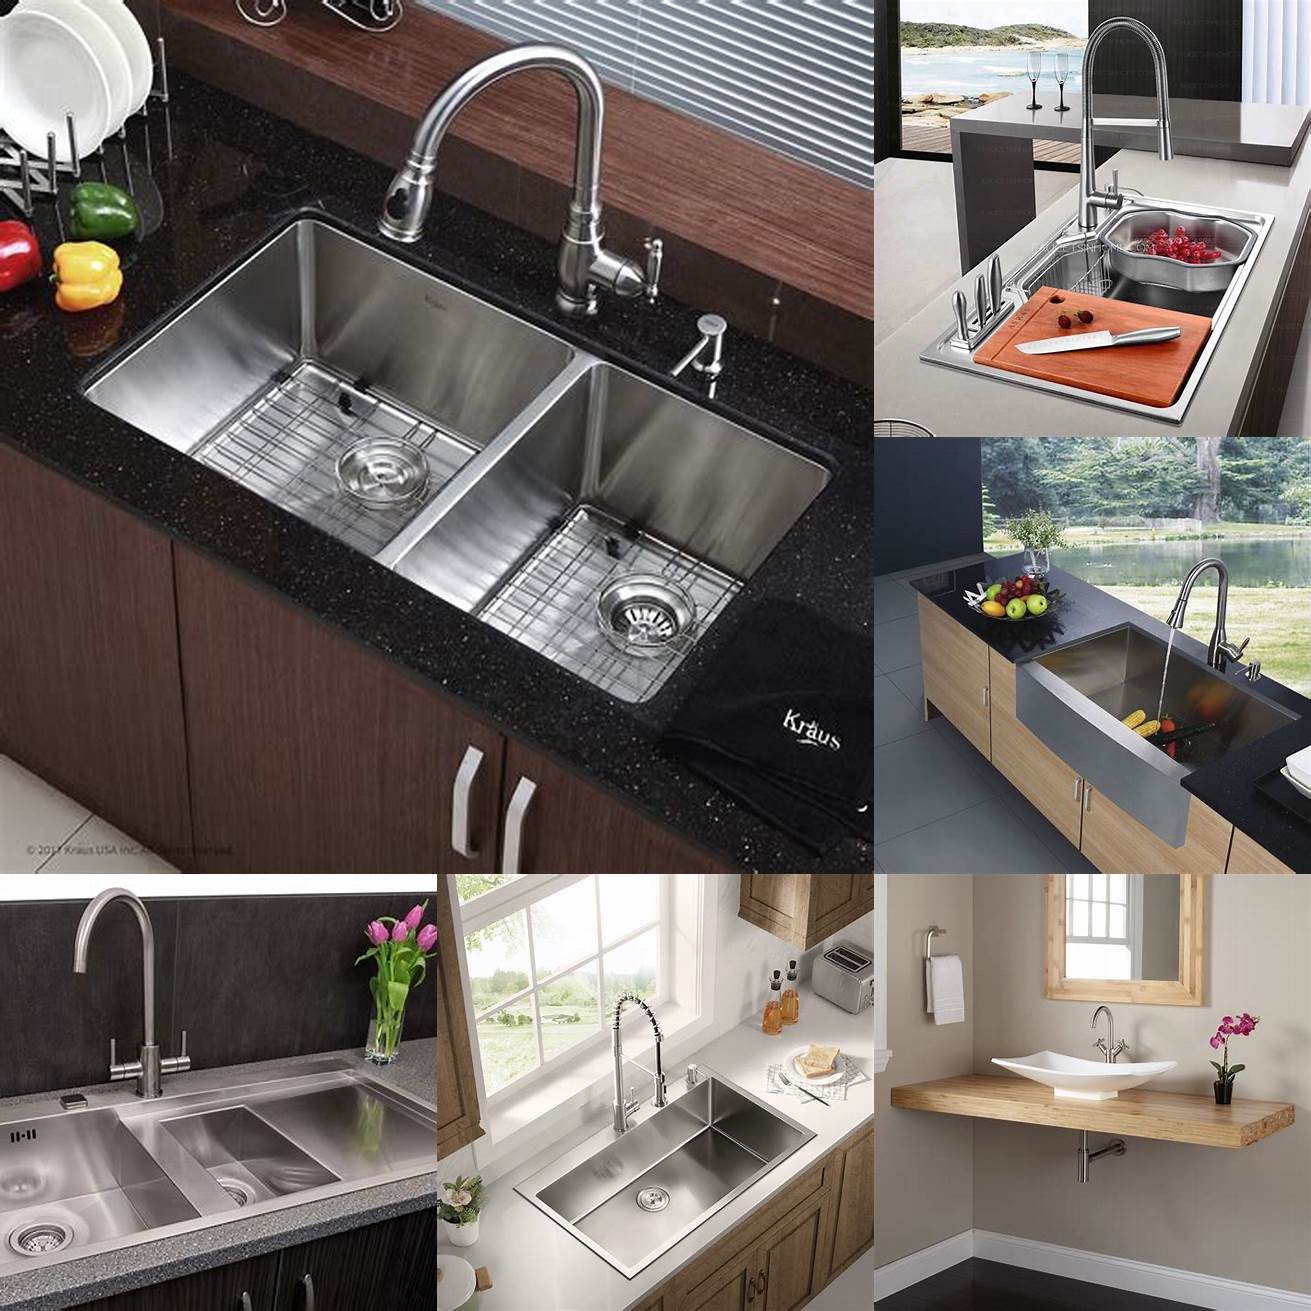 The large sink basin may take up more counter space than you are used to